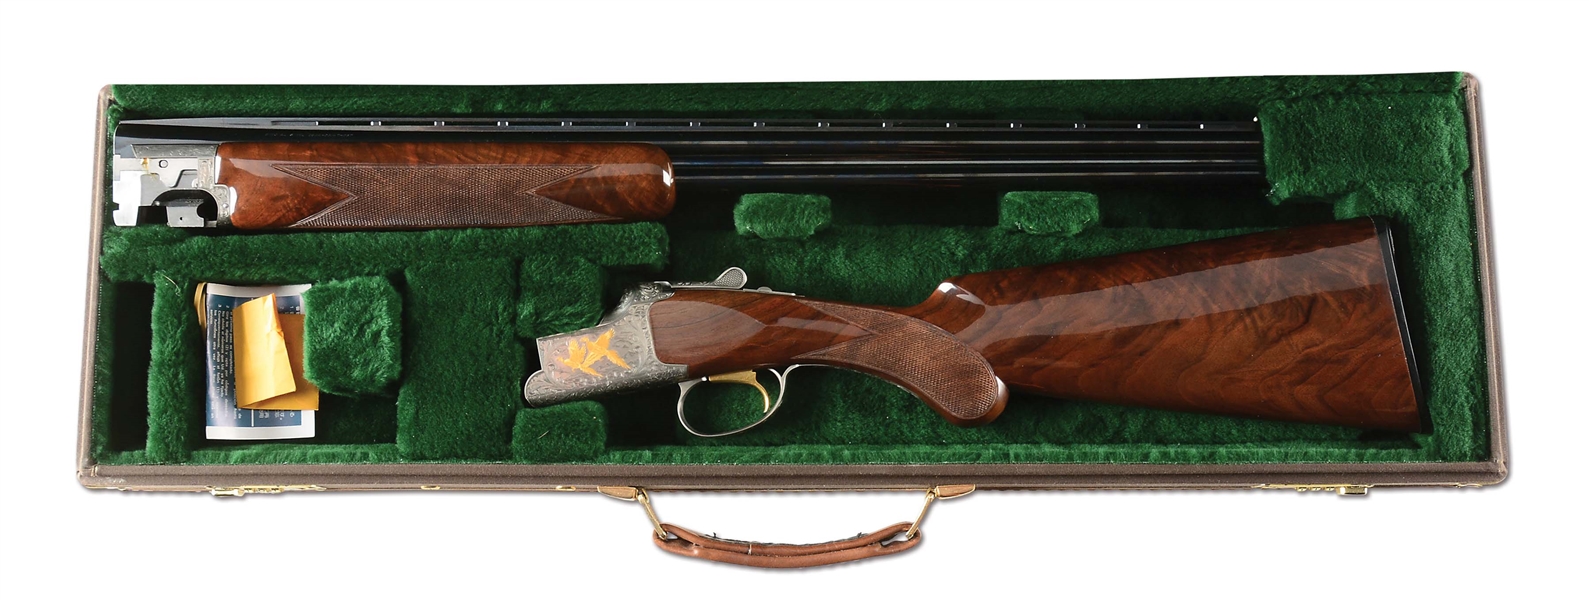 (M) GORGEOUS AND RARE, CASED AND ENGRAVED BROWNING CITORI GRADE VI 28 GAUGE SPECIAL SKEET OVER-UNDER SHOTGUN.